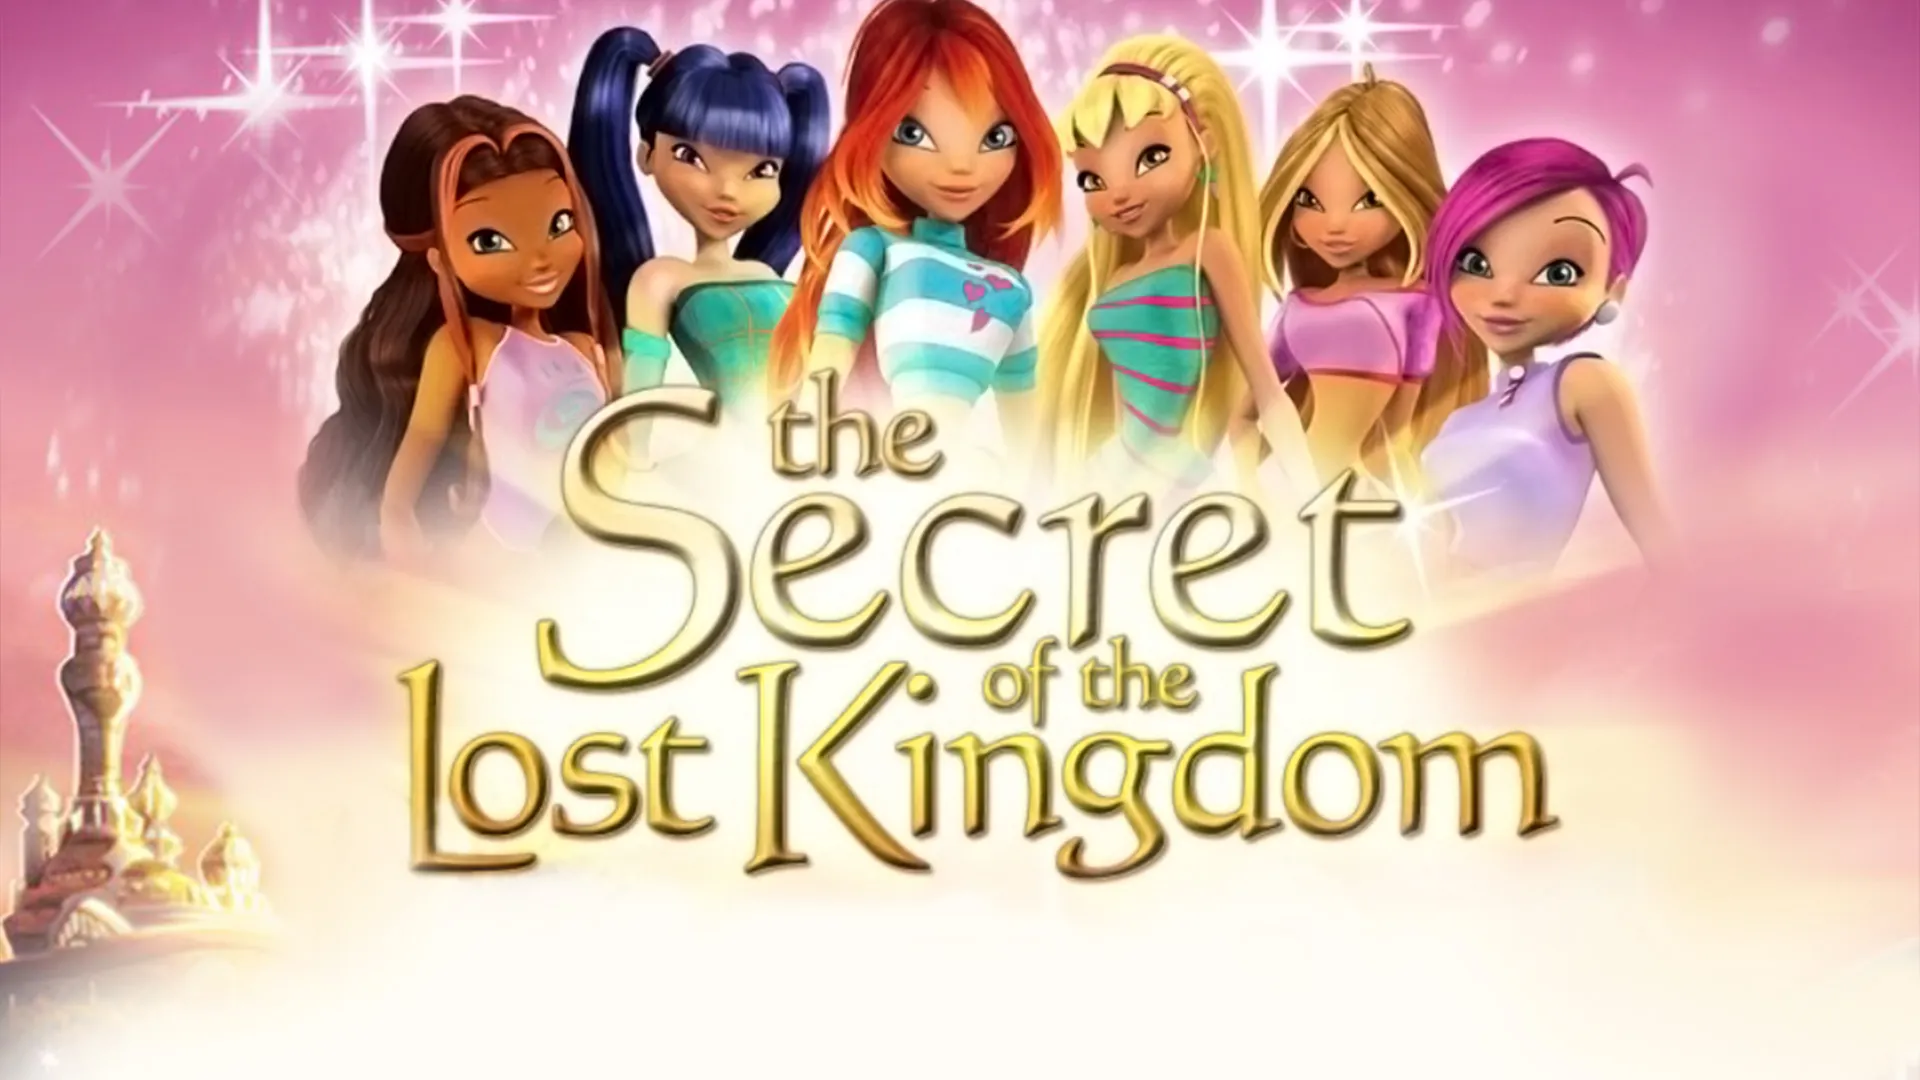 Winx Club The Secret of the Lost Kingdom 2007 Hindi Eng Dual Audio Download 480p 720p 1080p HD Rare Toons India